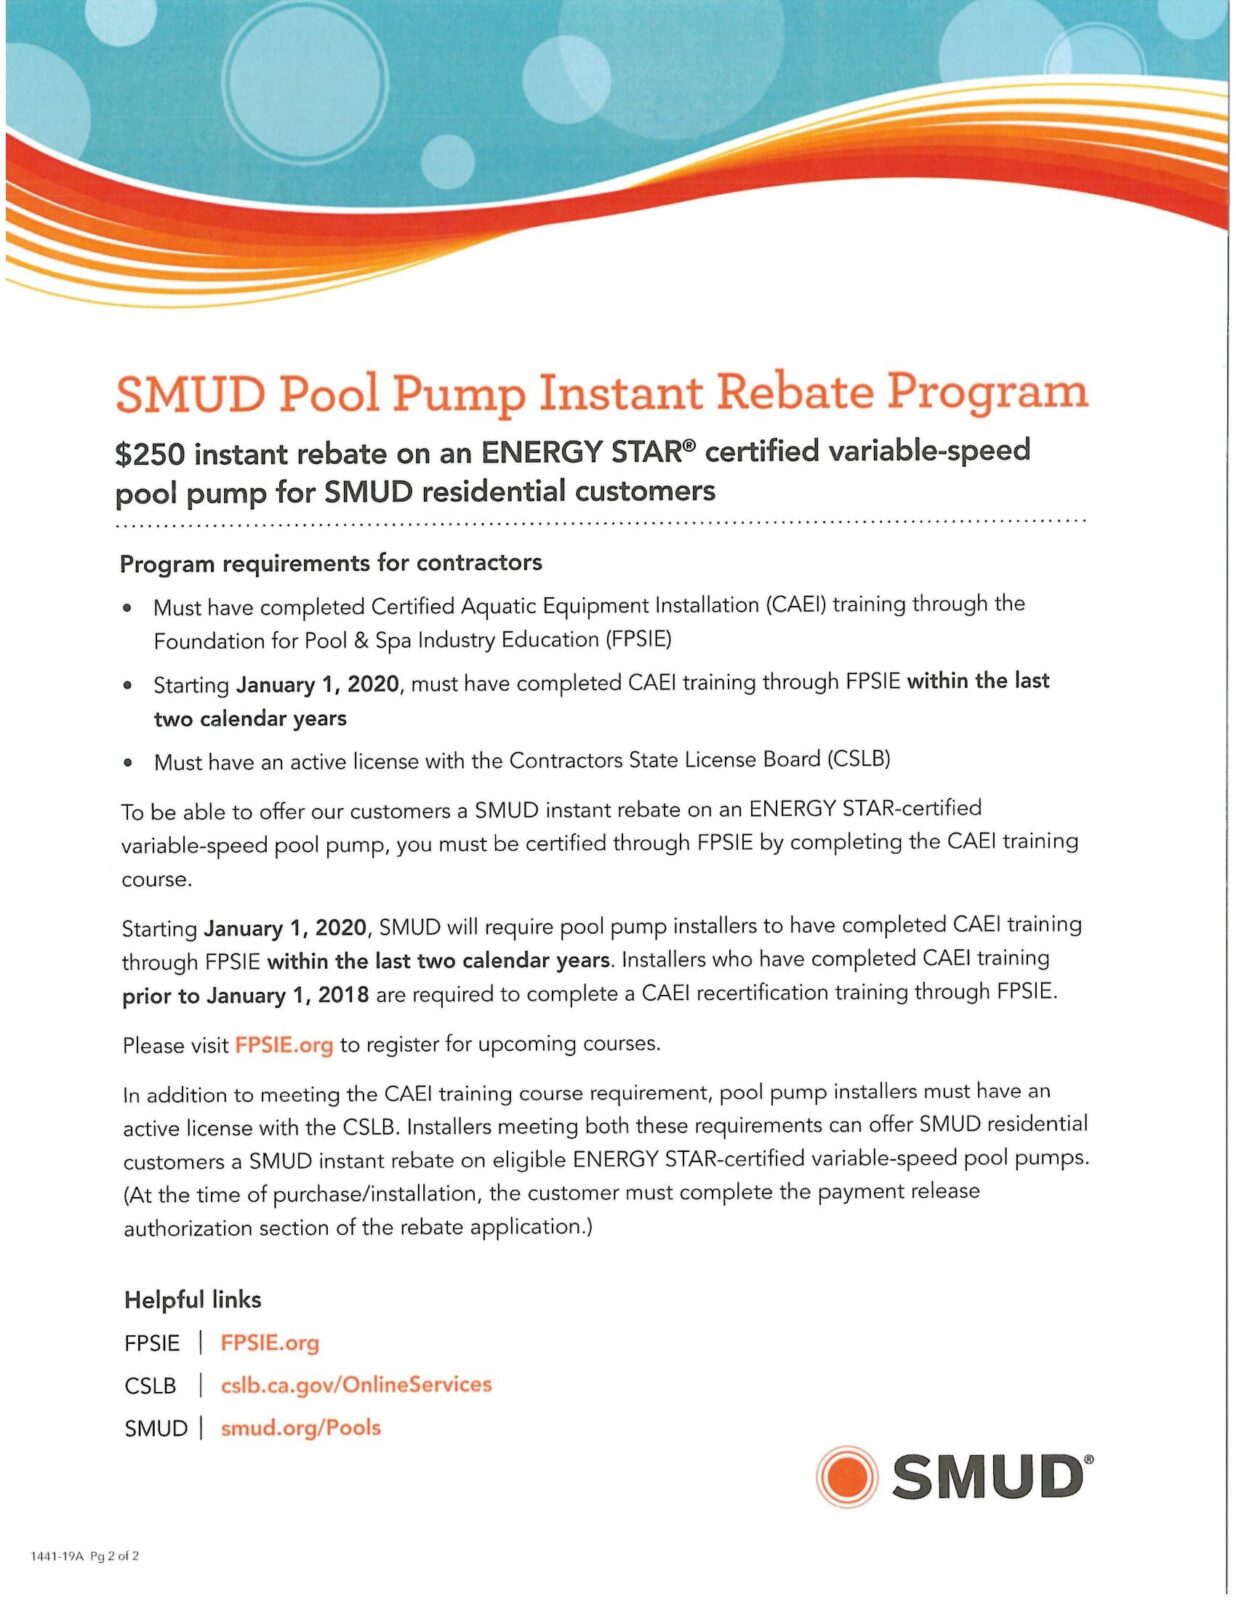 smud-s-contractor-rebate-program-qualifications-and-updates